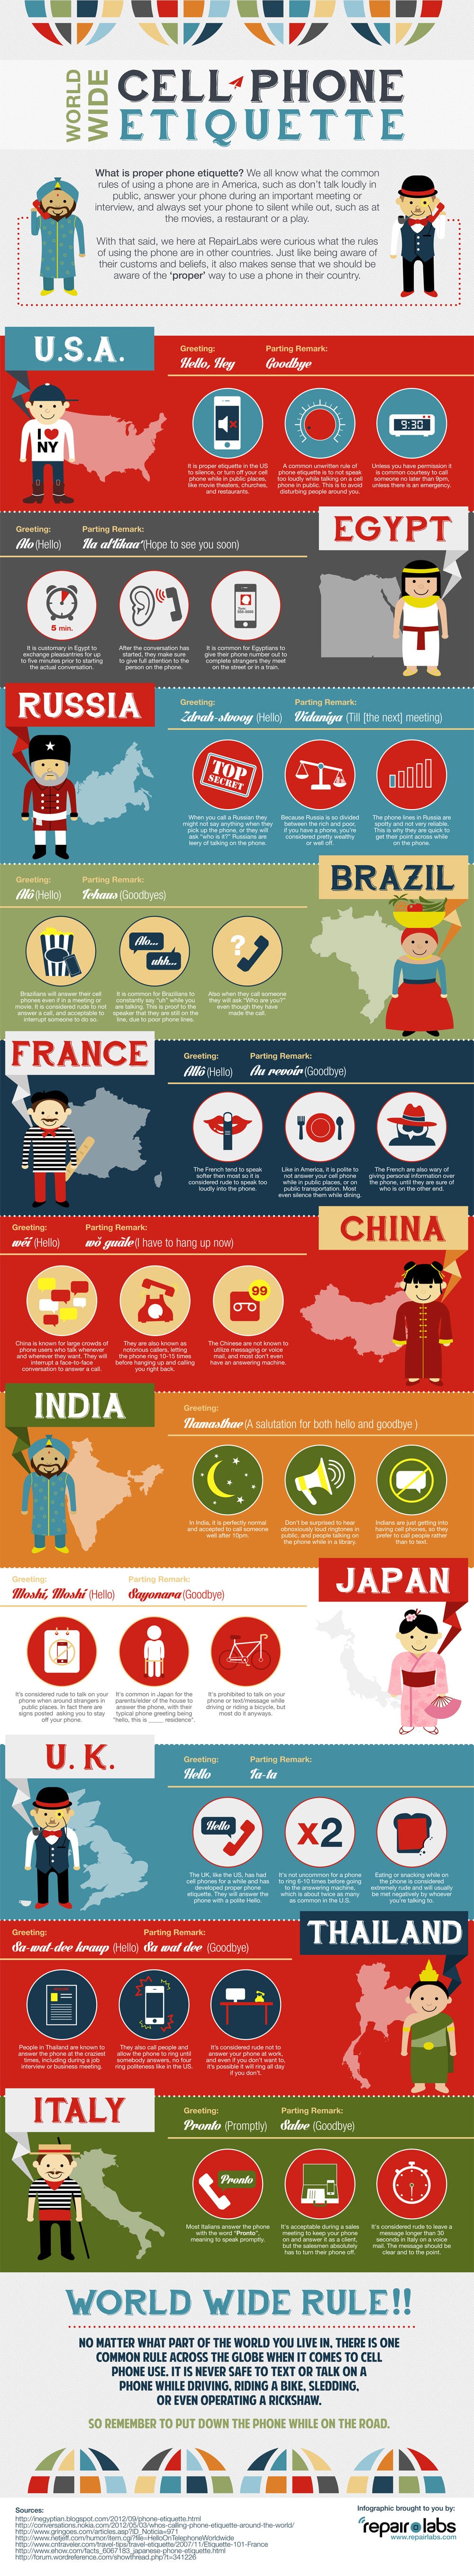 How Cell Phone Etiquette Is Different Around The World [Infographic]